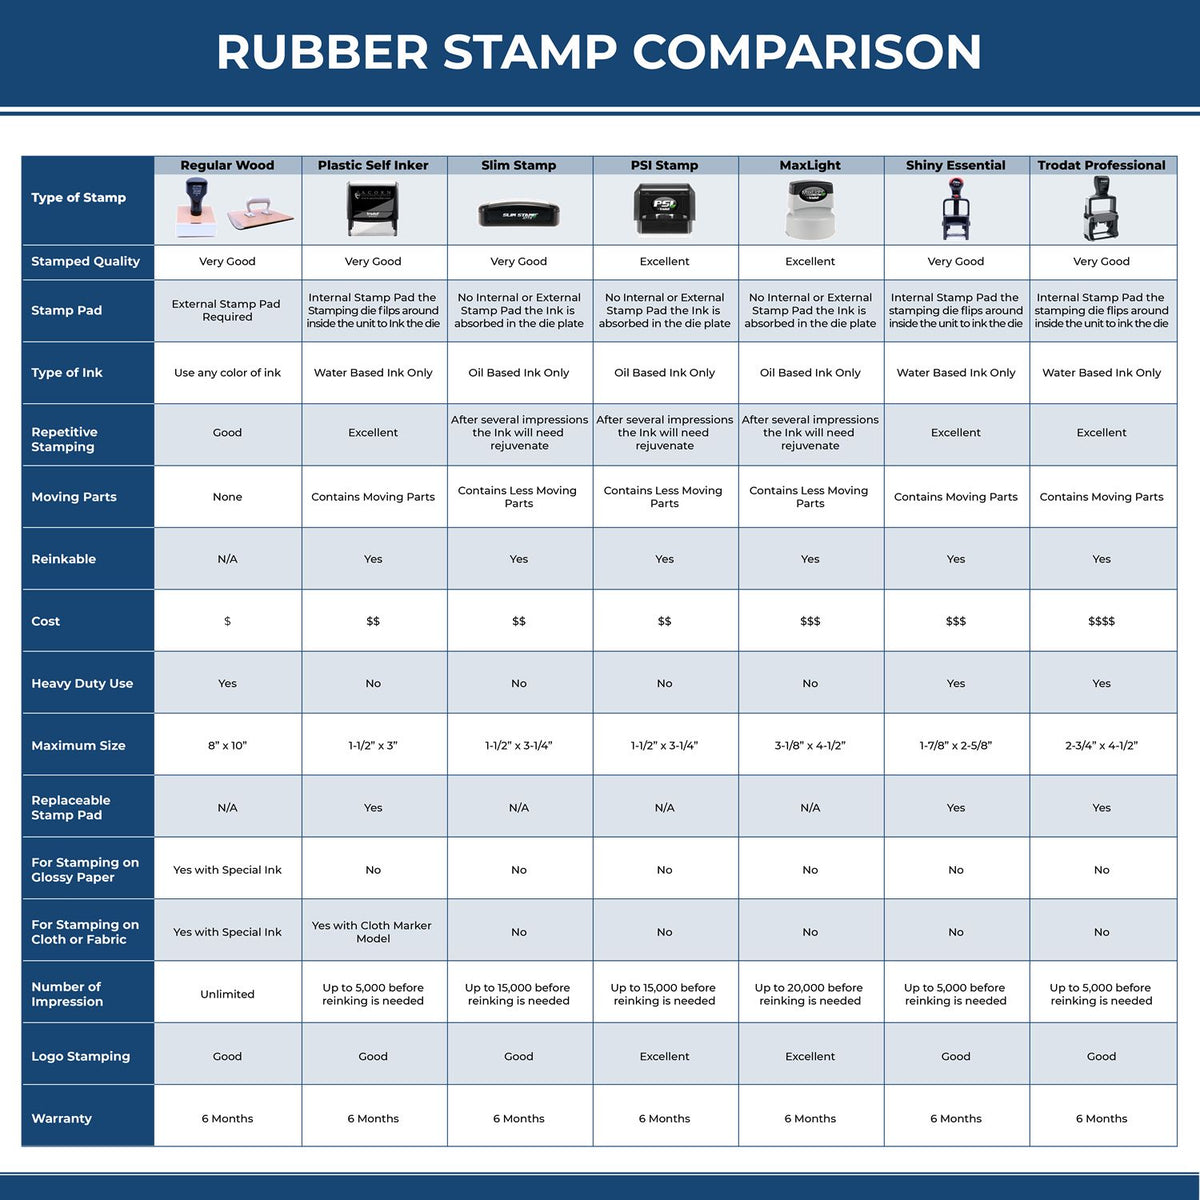 Jumbo Dated Material Open Immediately Xstamper Stamp 5110 Rubber Stamp Comparison